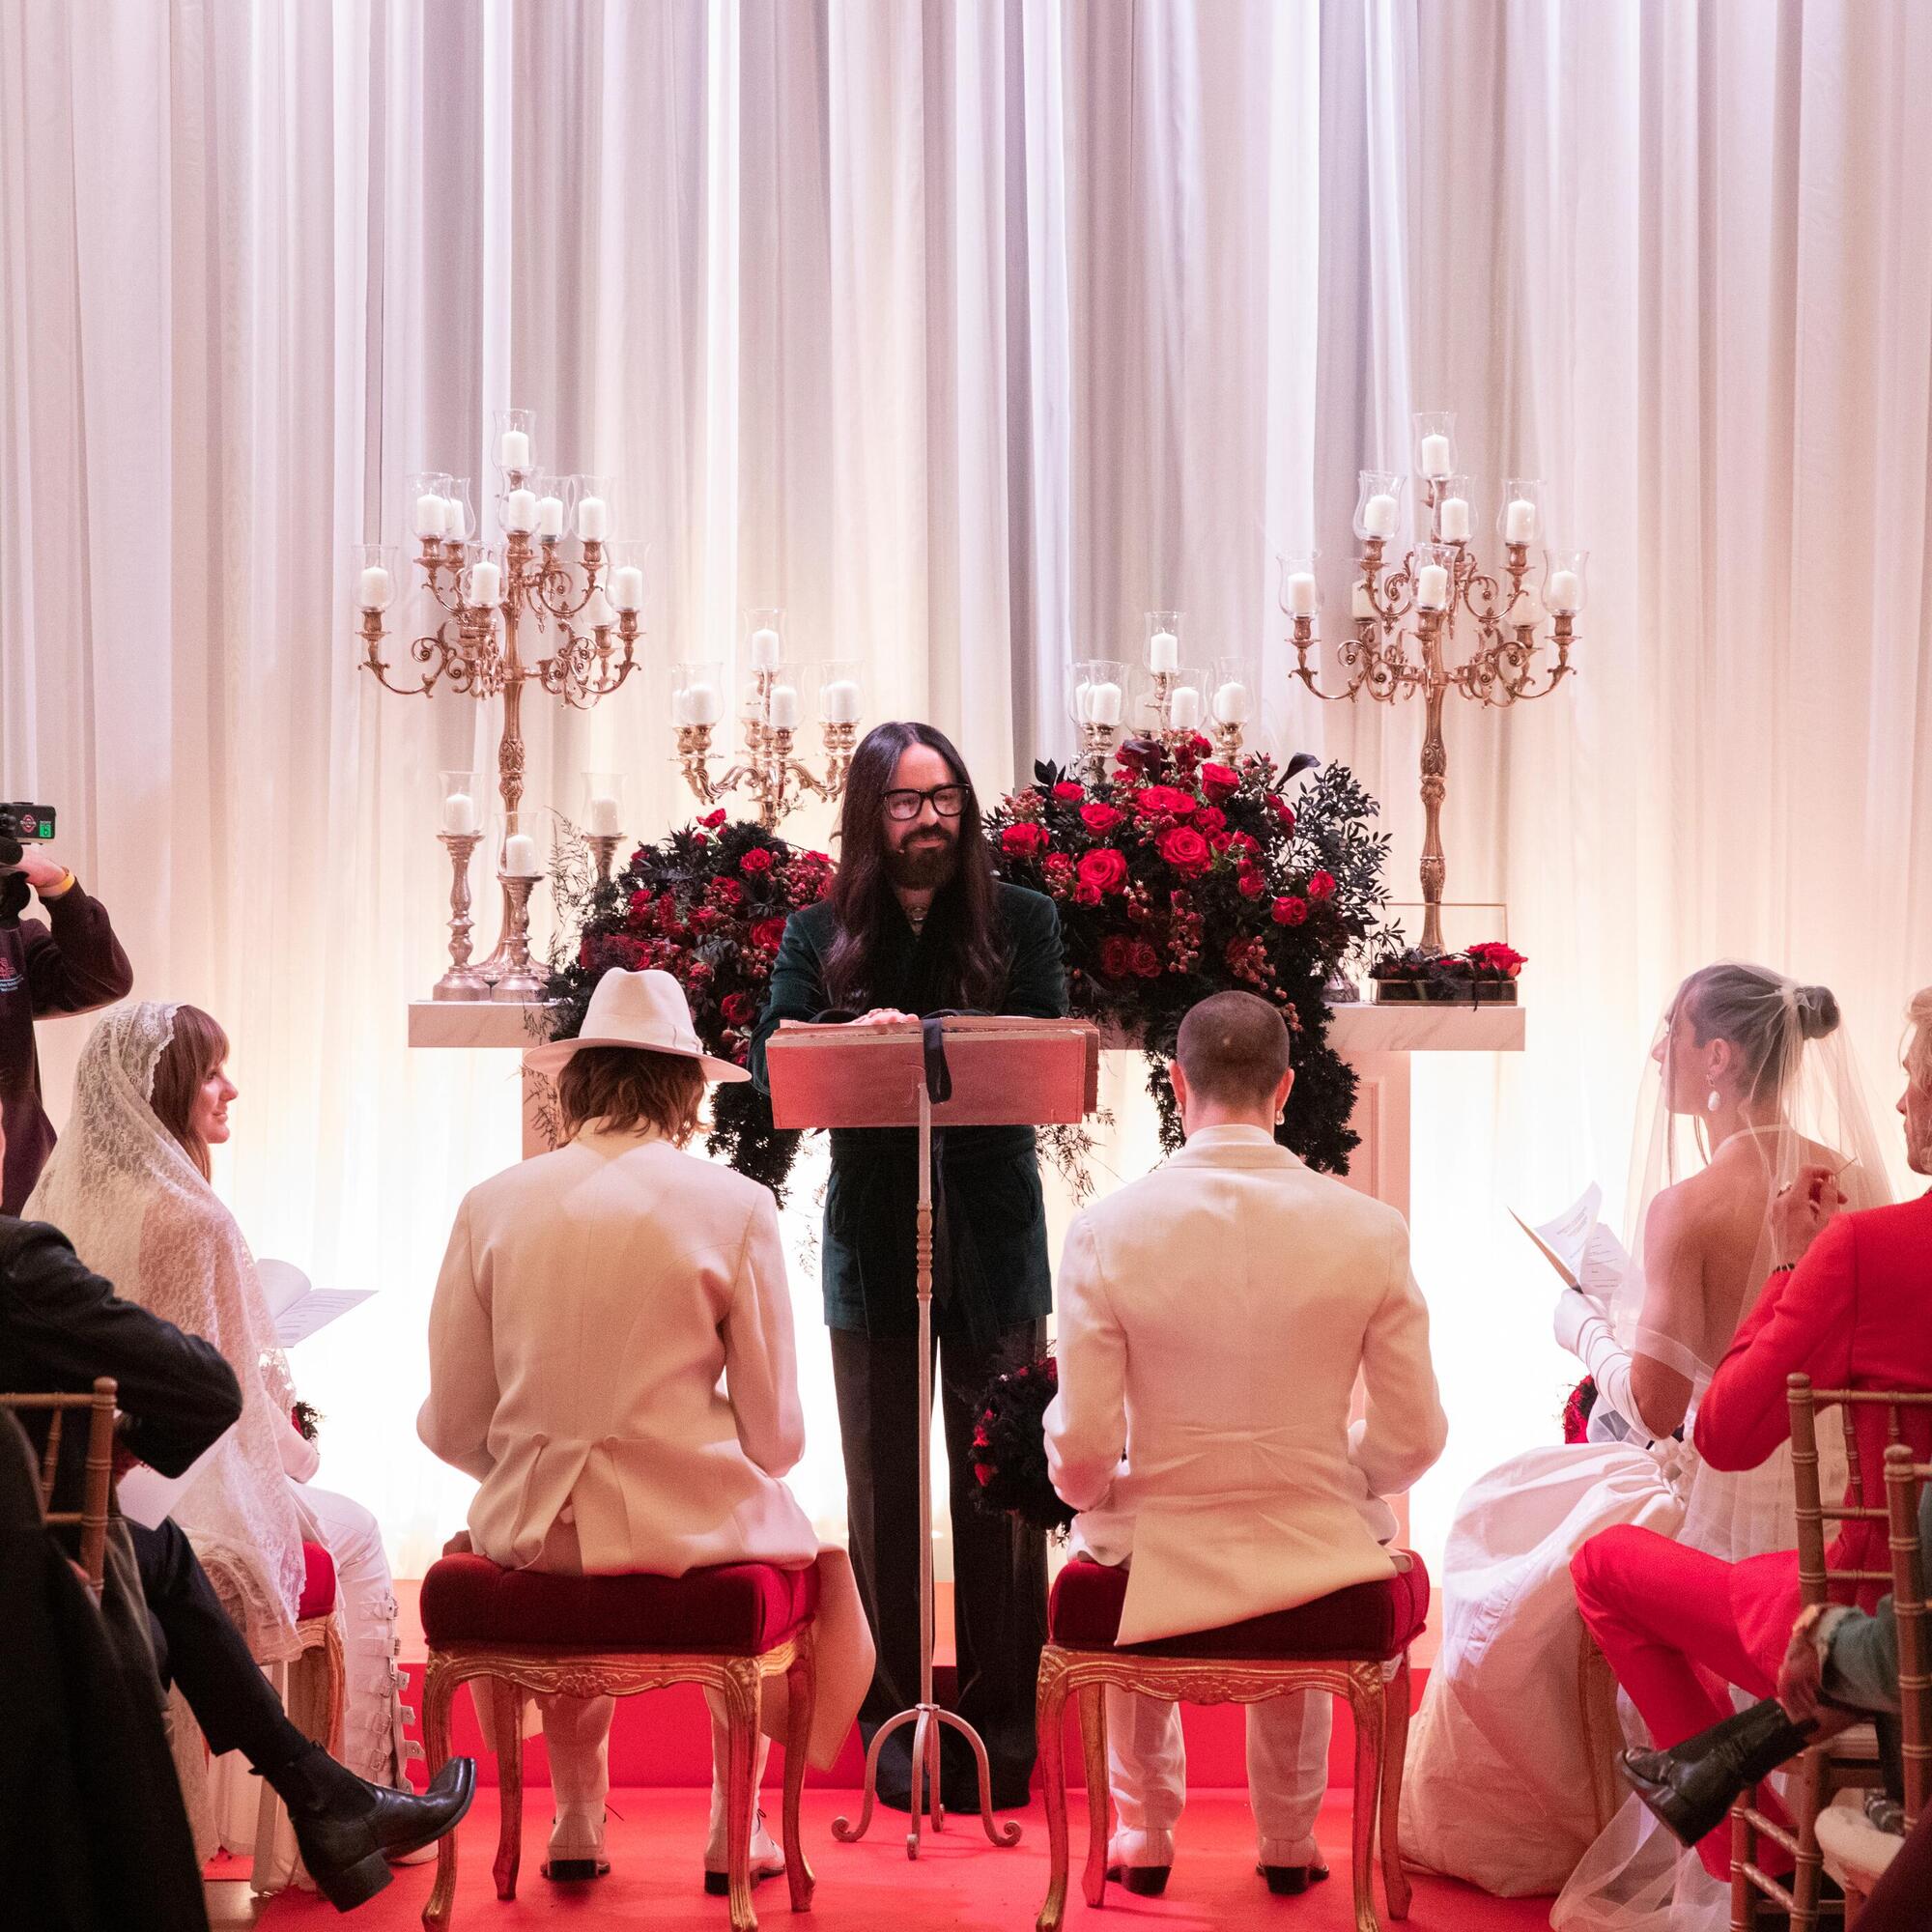 Maneskin RUSHes to the Altar - Alessandro Michele